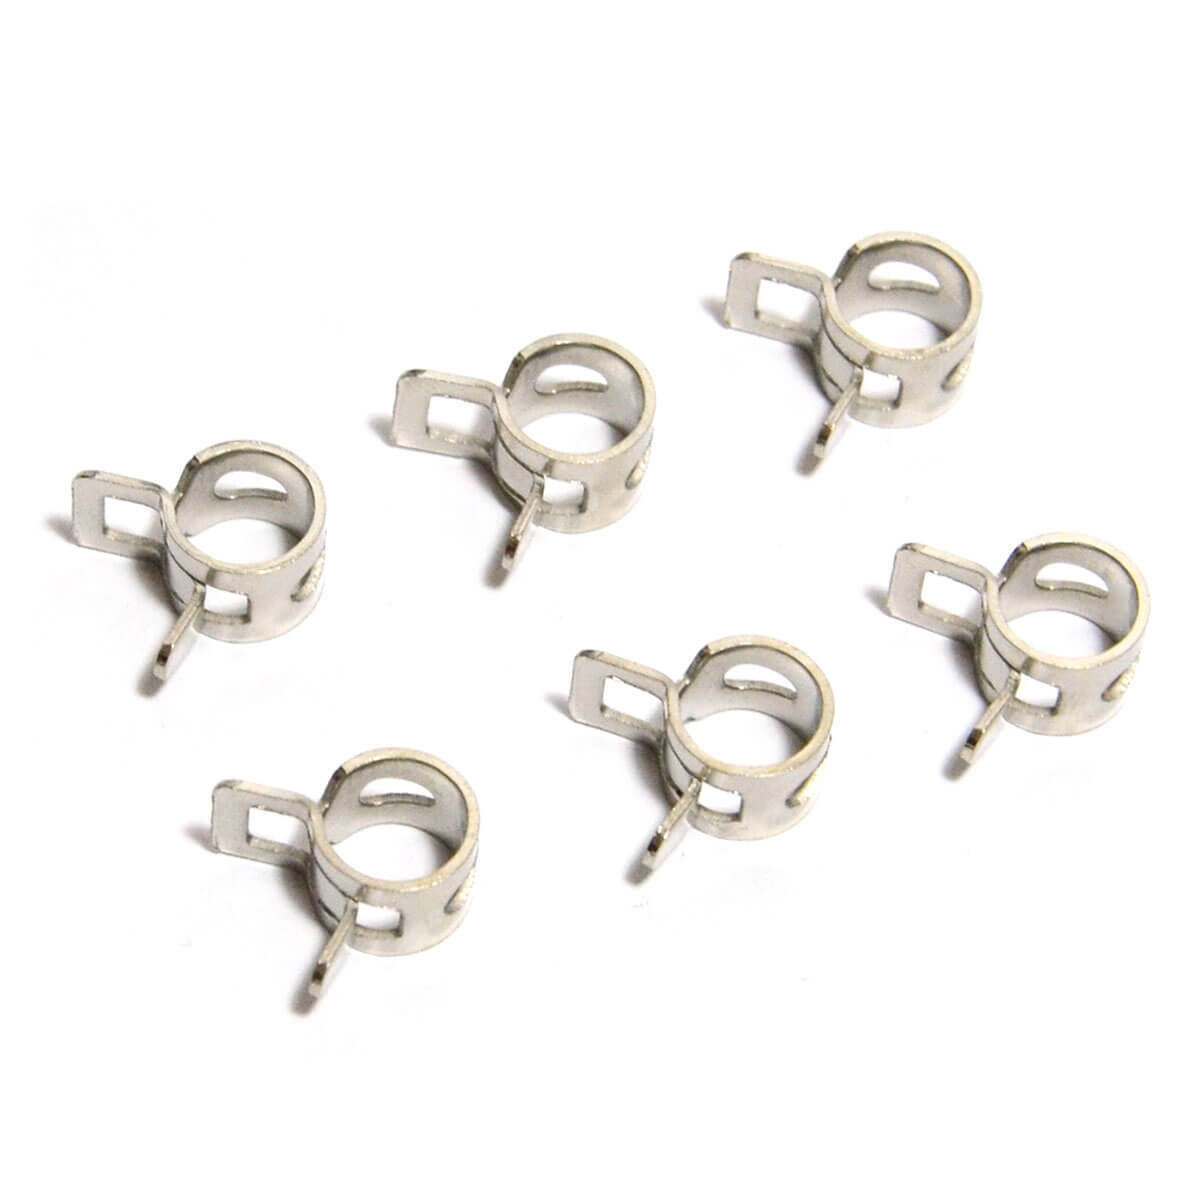 Hose Clamps Spring Size 4 suits 4mm (5/32") hose Pack of 6